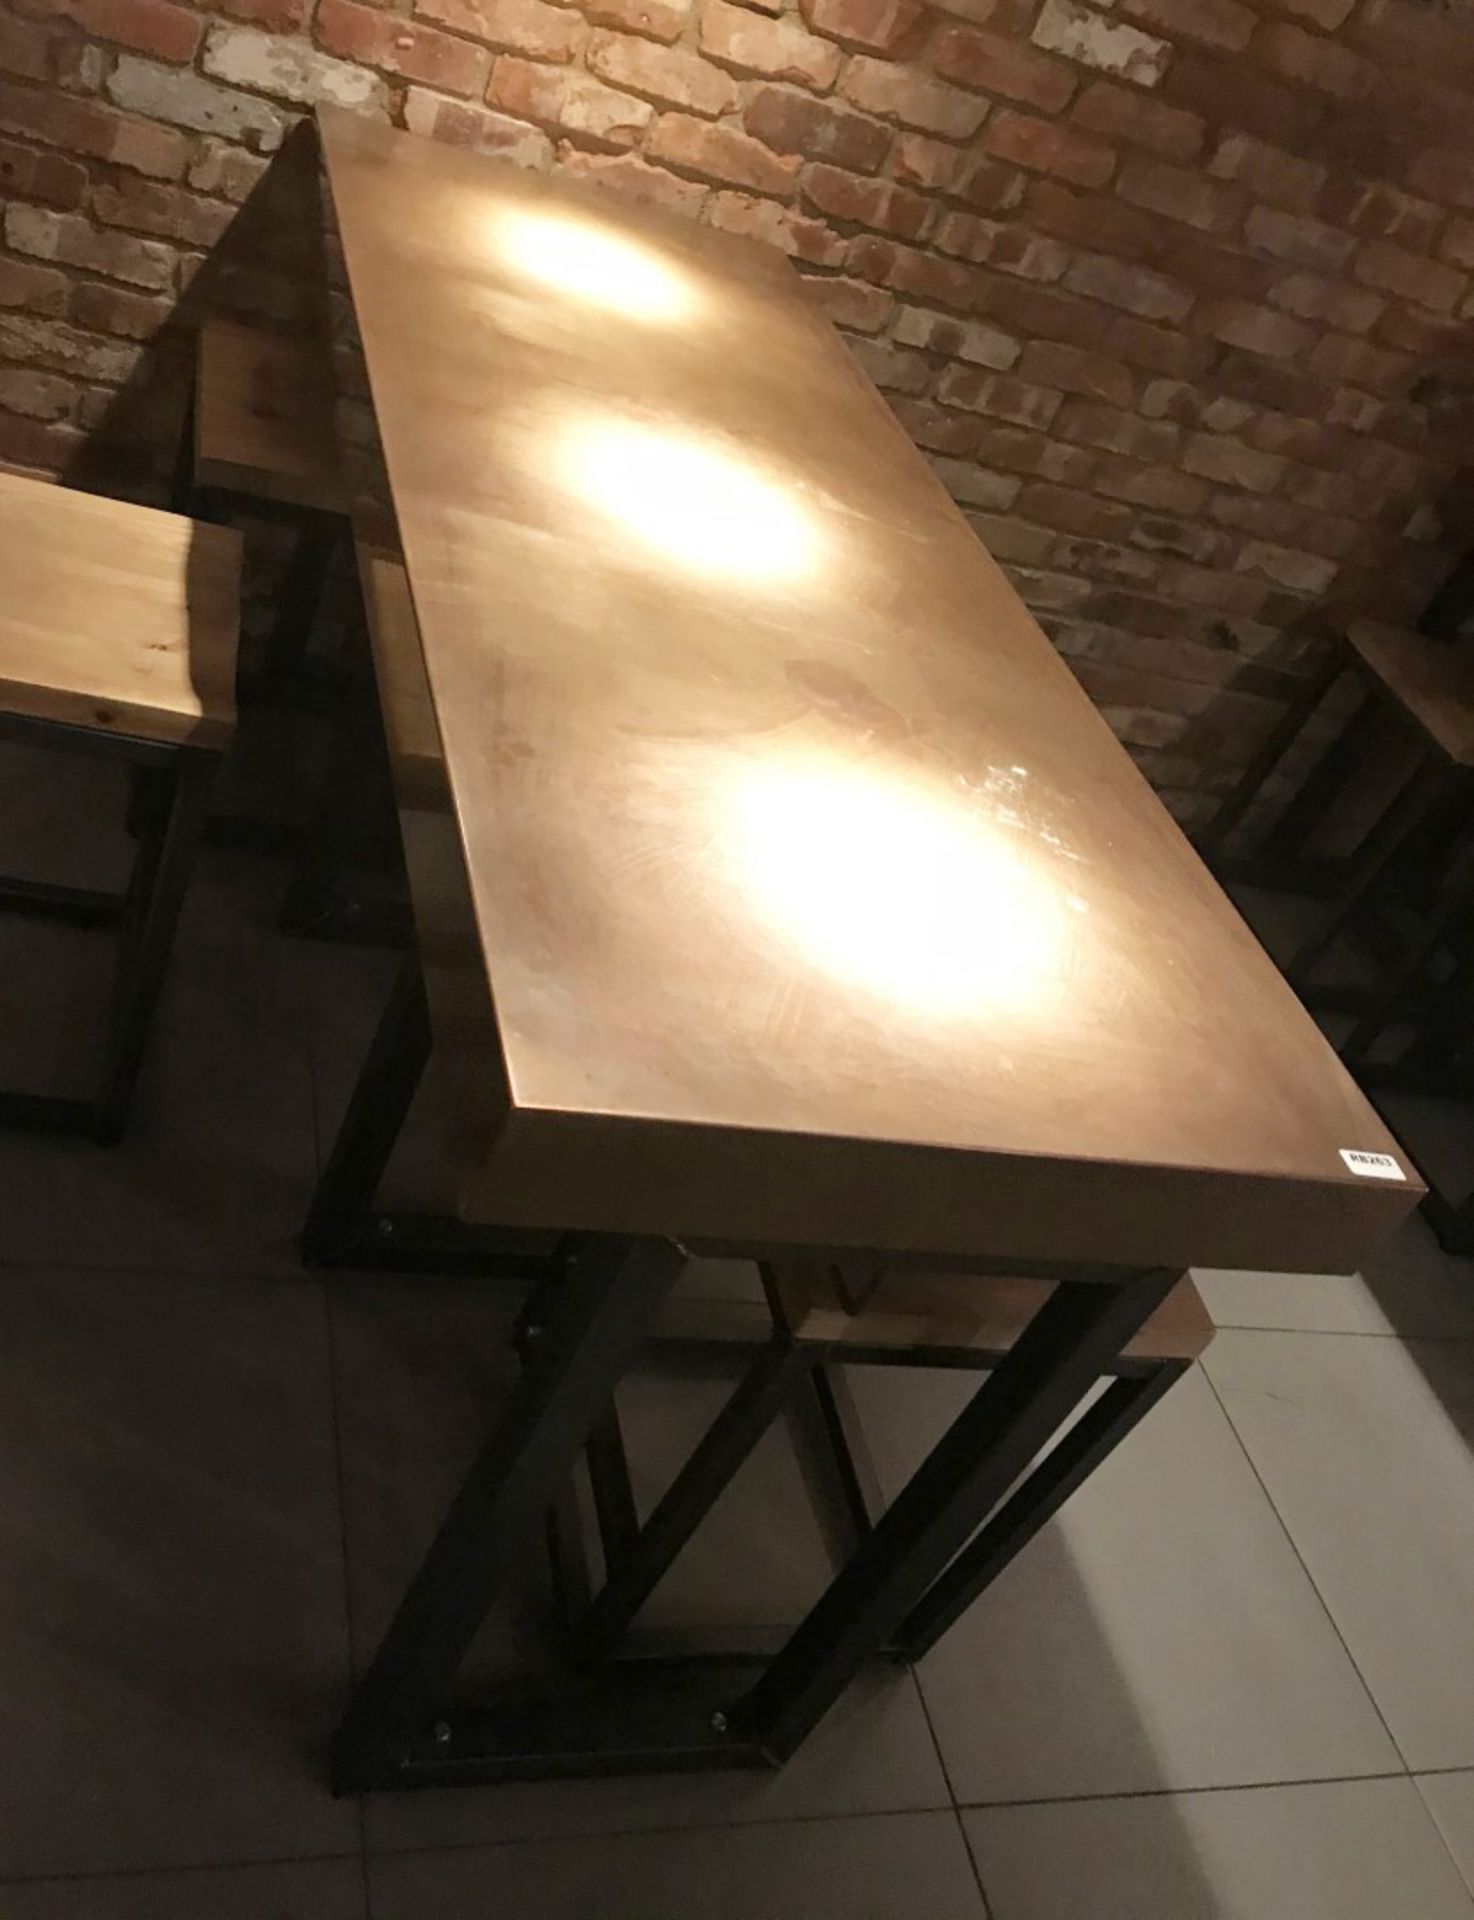 1 x Restaurant Dining Table With Industrial Metal Base and Copper Top - Size H91 x W180 x D70 - Image 6 of 7